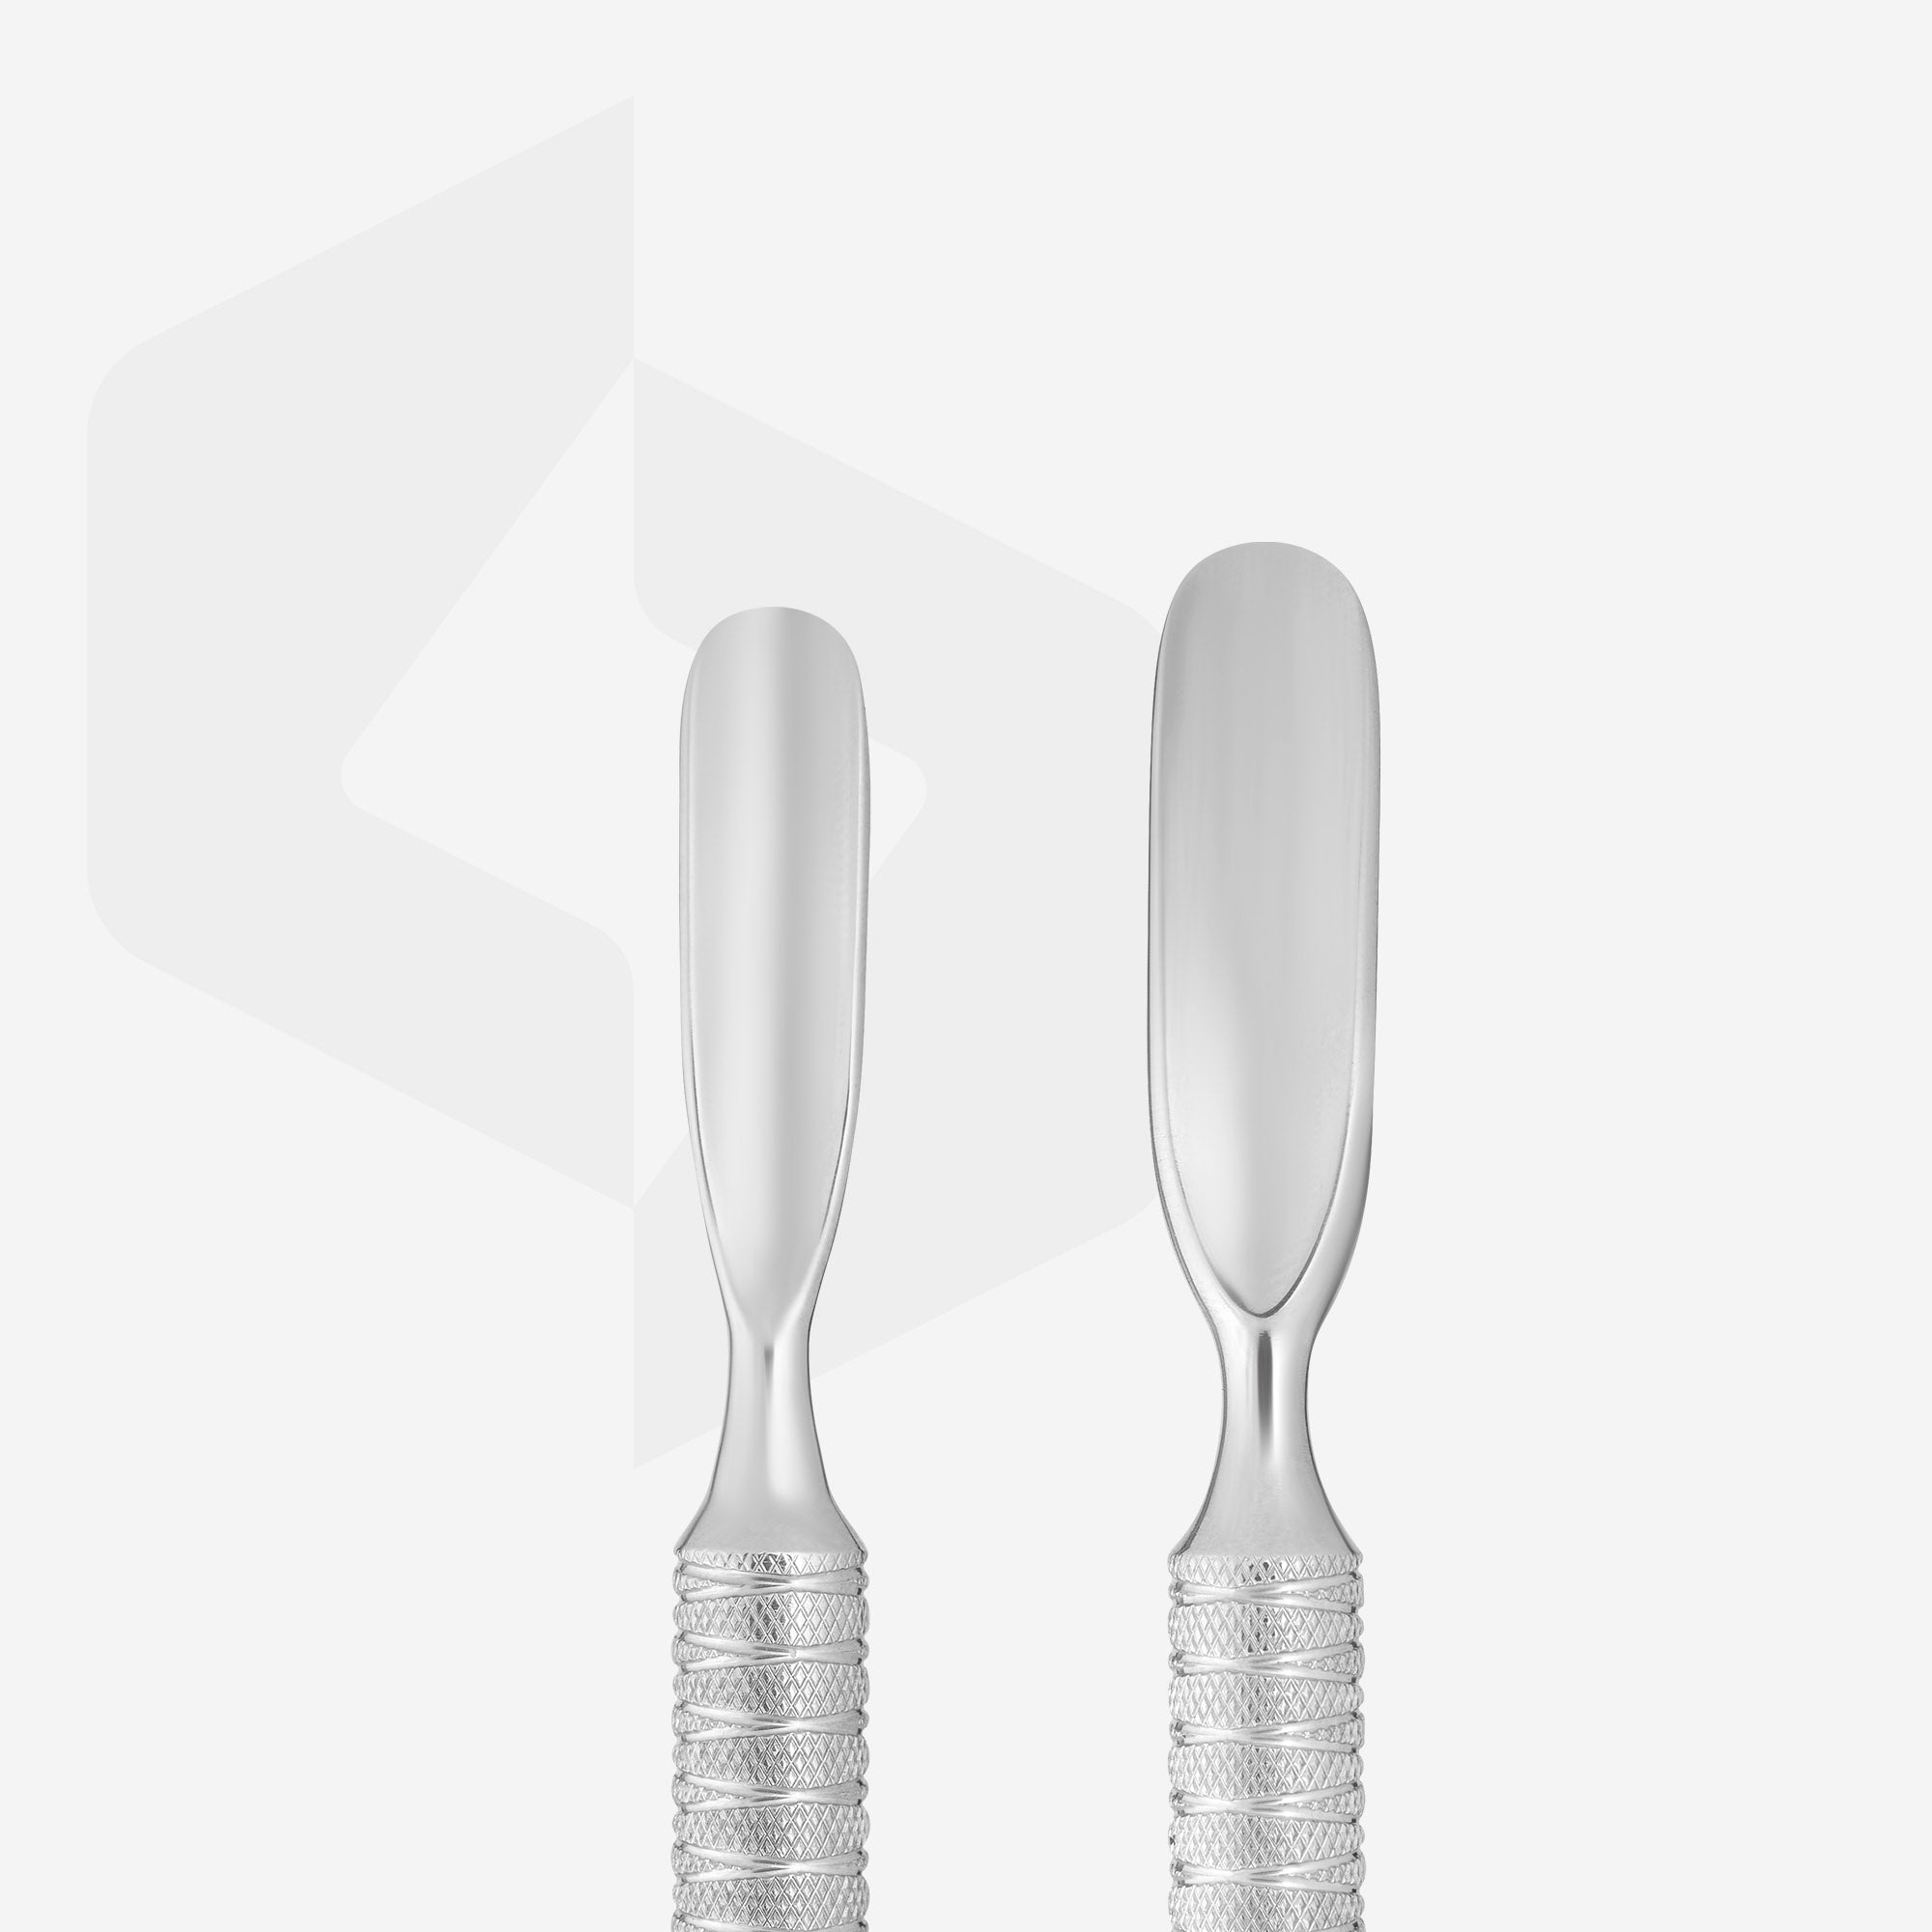 Staleks Pro Cuticle Pusher - Wide and Narrow